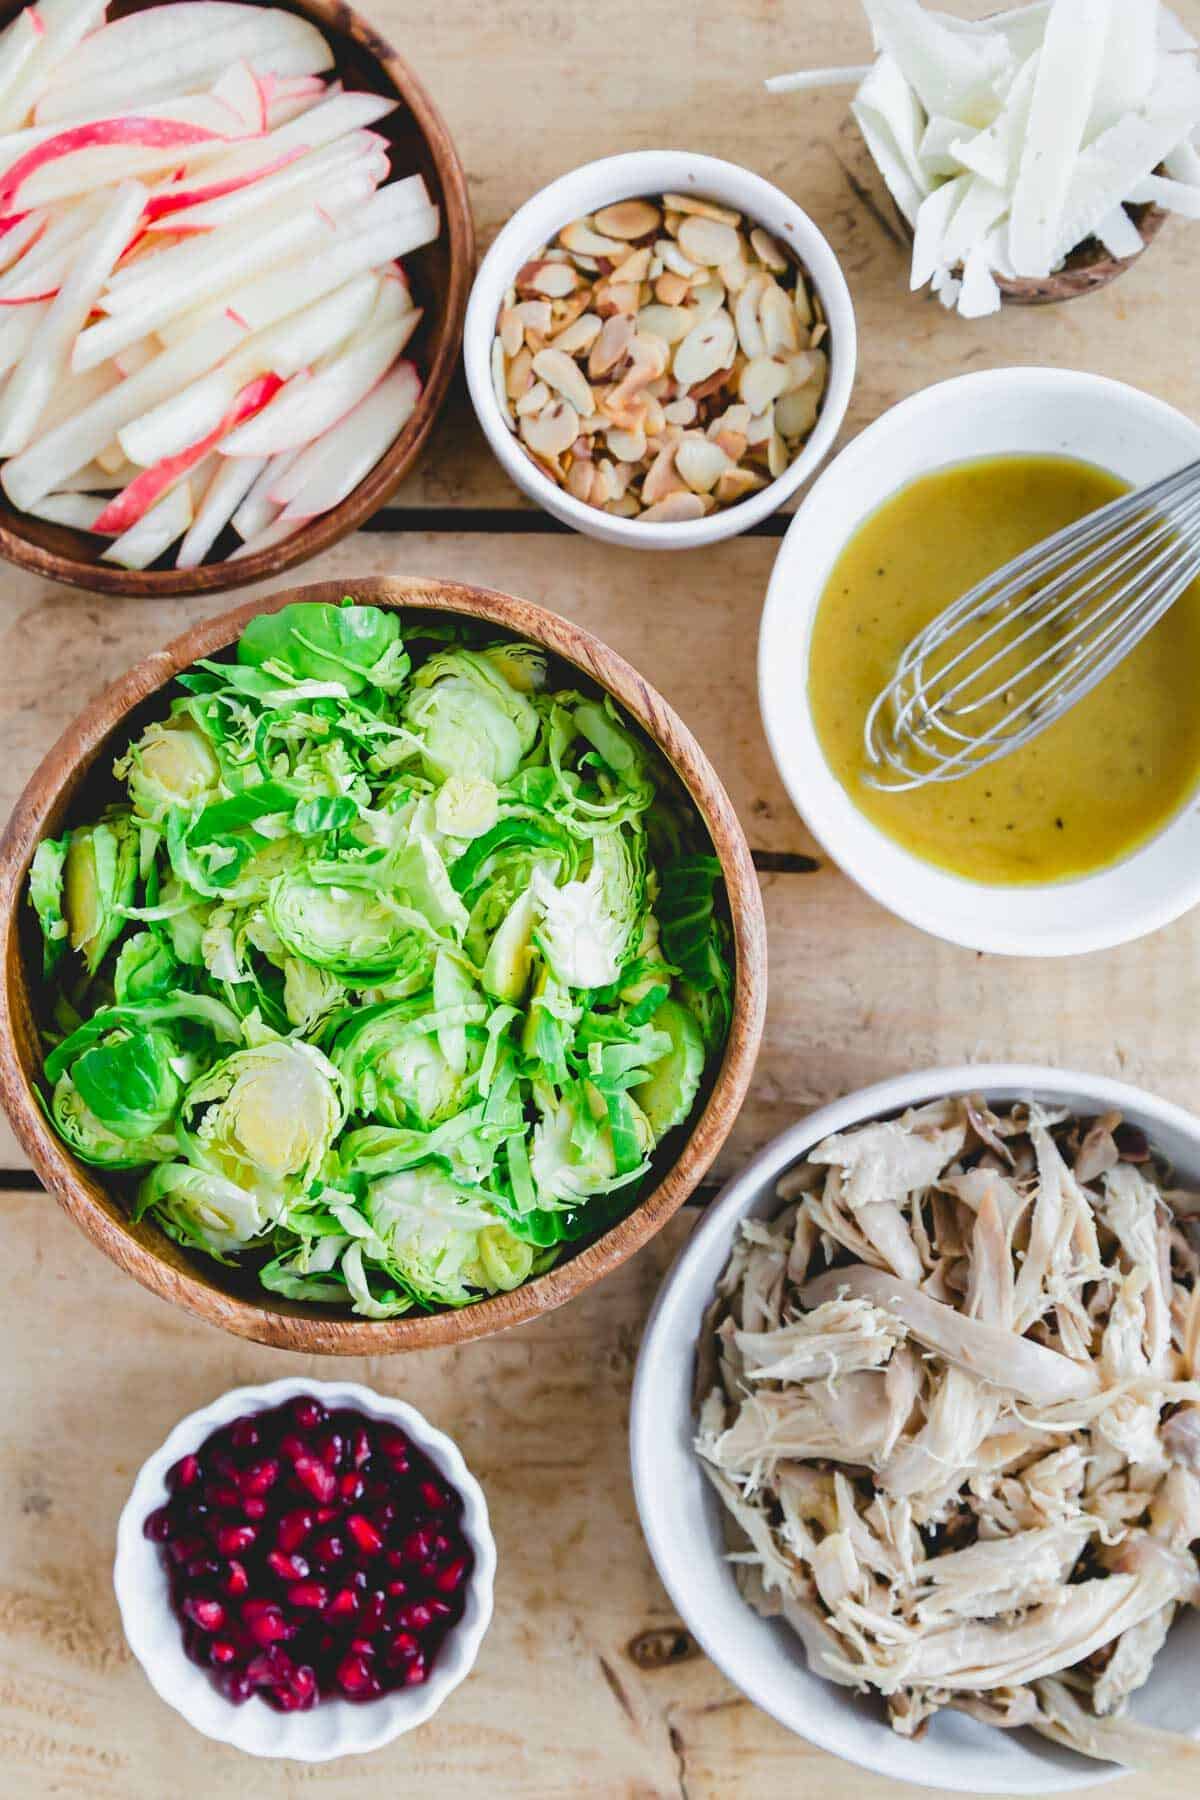 Ingredients to make Brussels sprouts and chicken salad with honey mustard dressing in bowls.